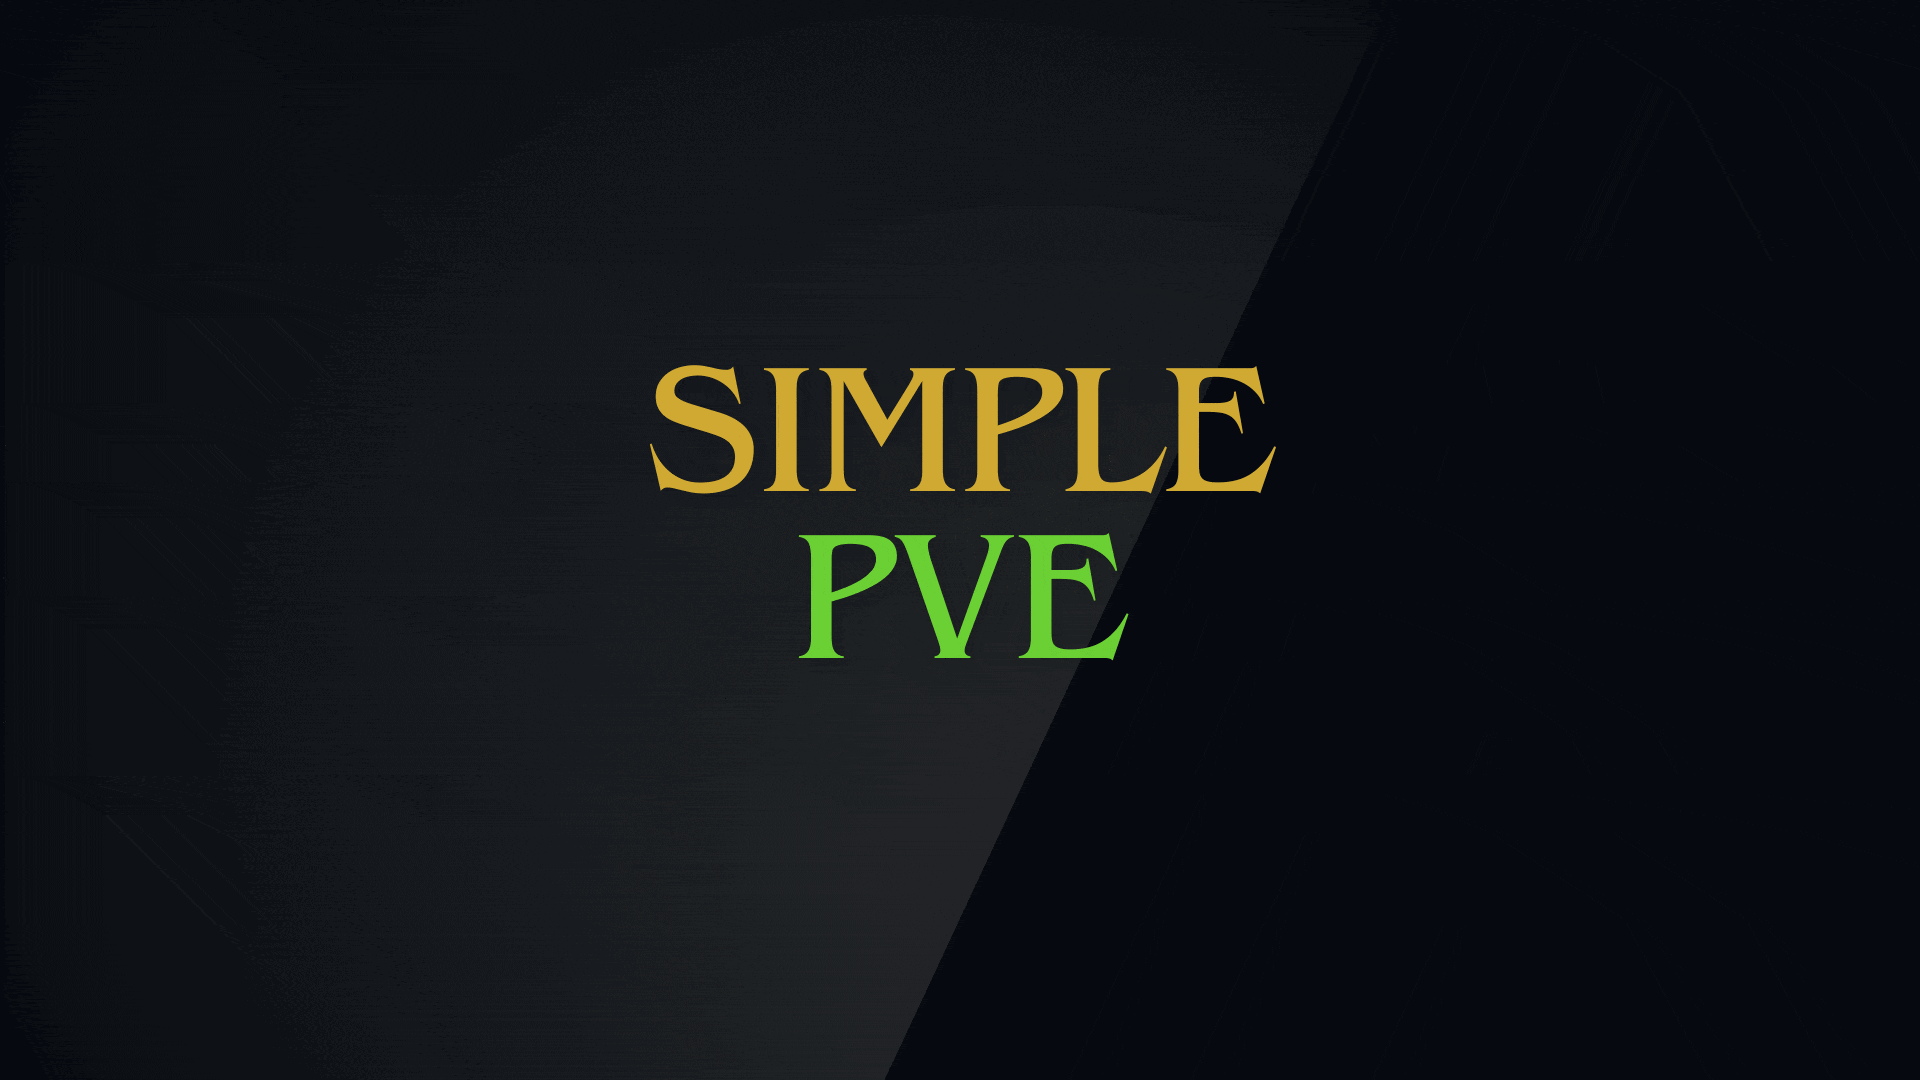 More information about "SimplePVE"